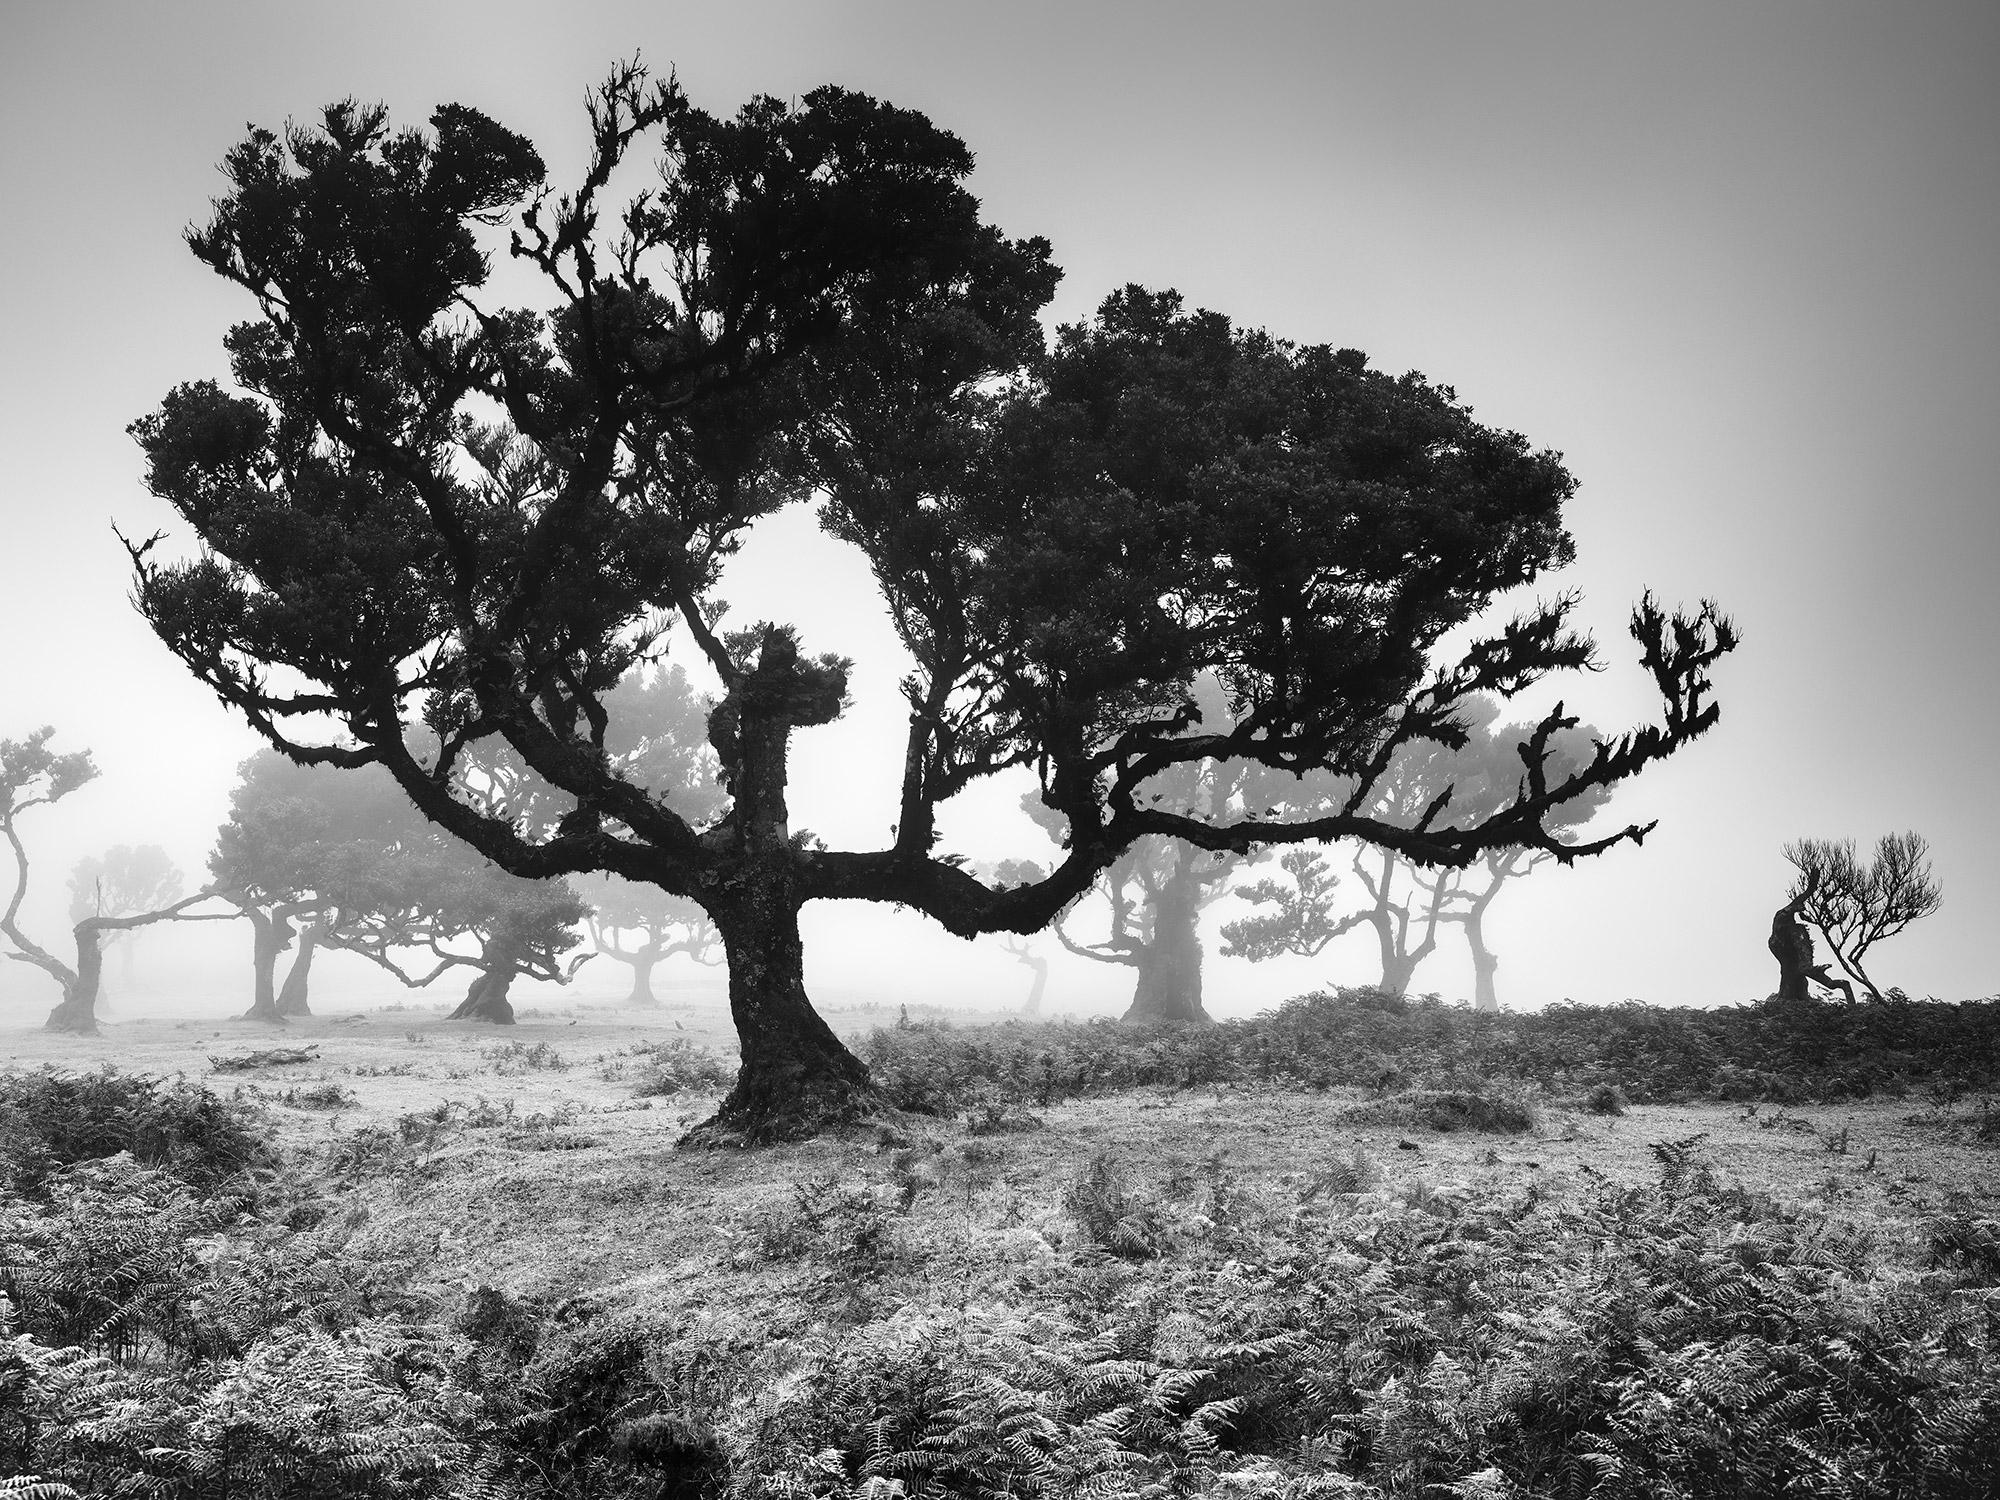 Gerald Berghammer Black and White Photograph - Ancient Laurisilva Forest, Tree, Portugal, black and white landscape photography